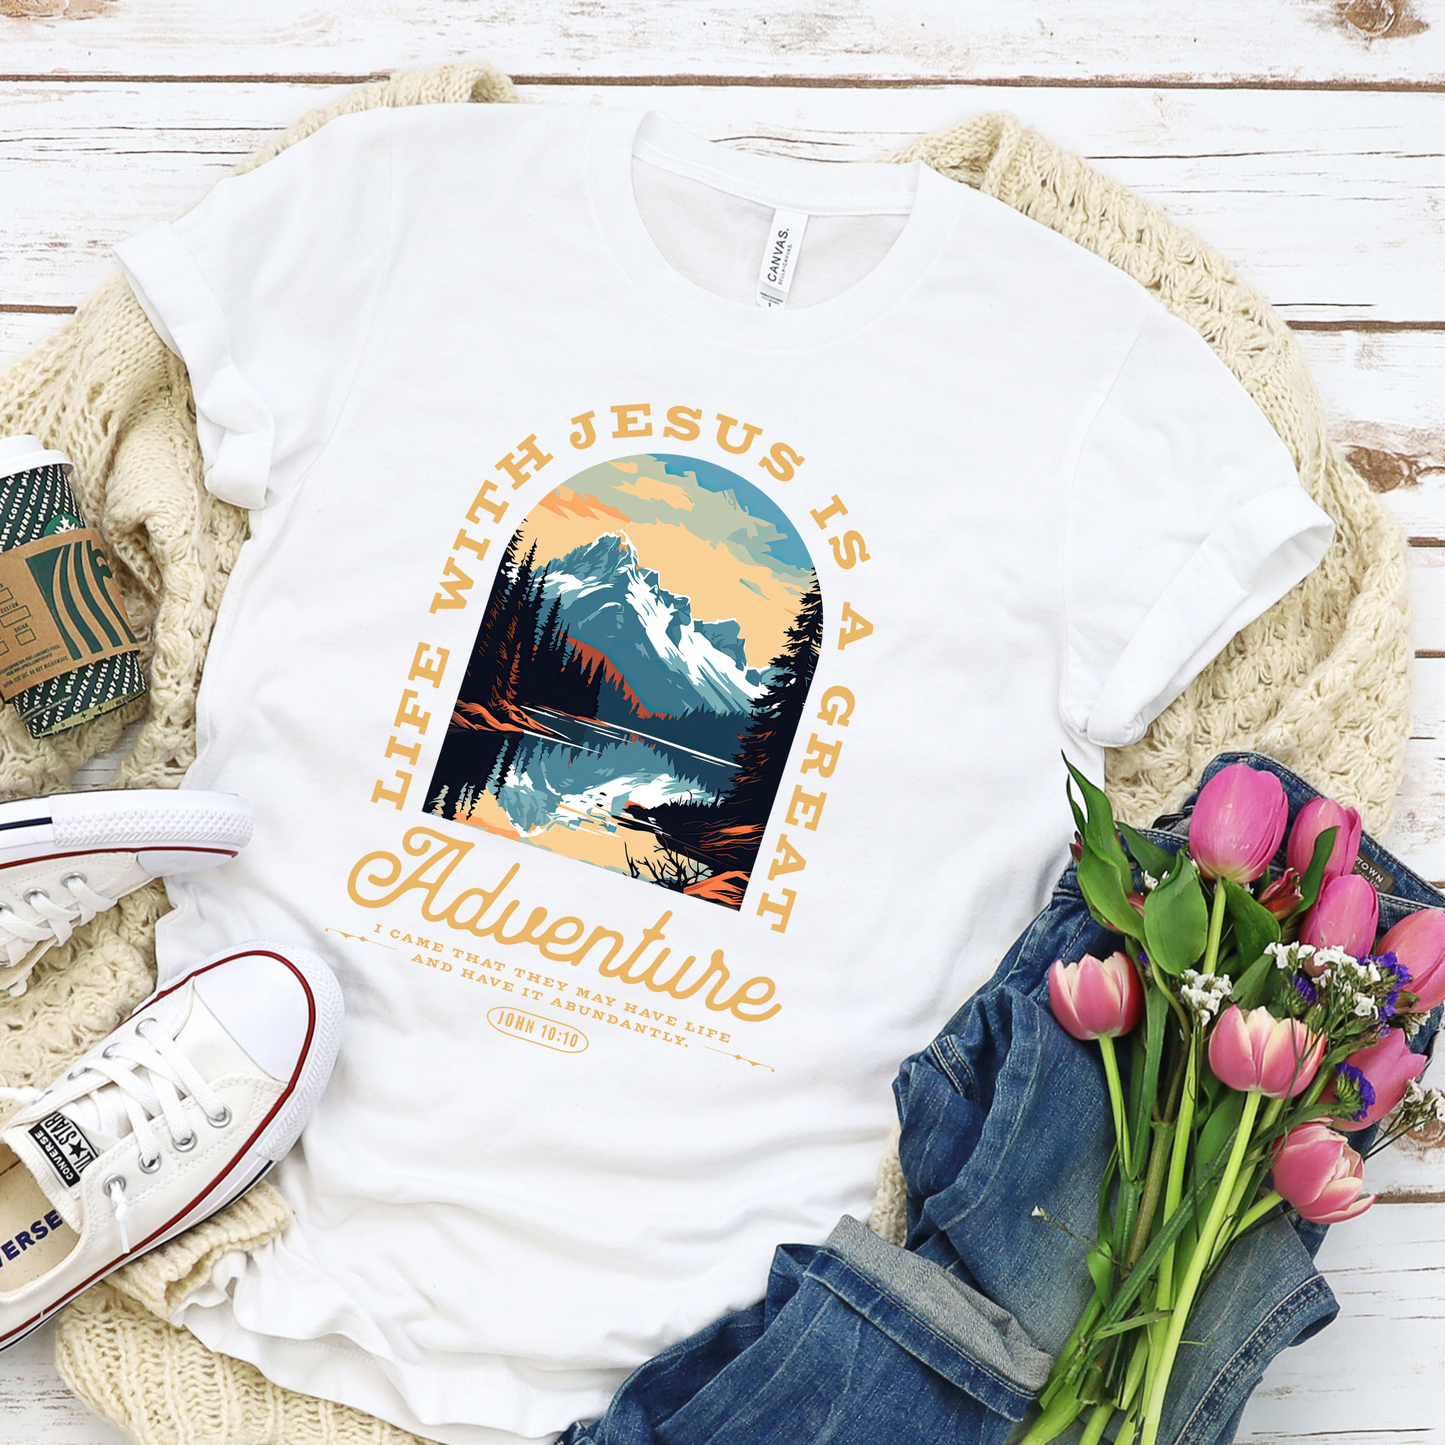 Life with Jesus is a great adventure tee